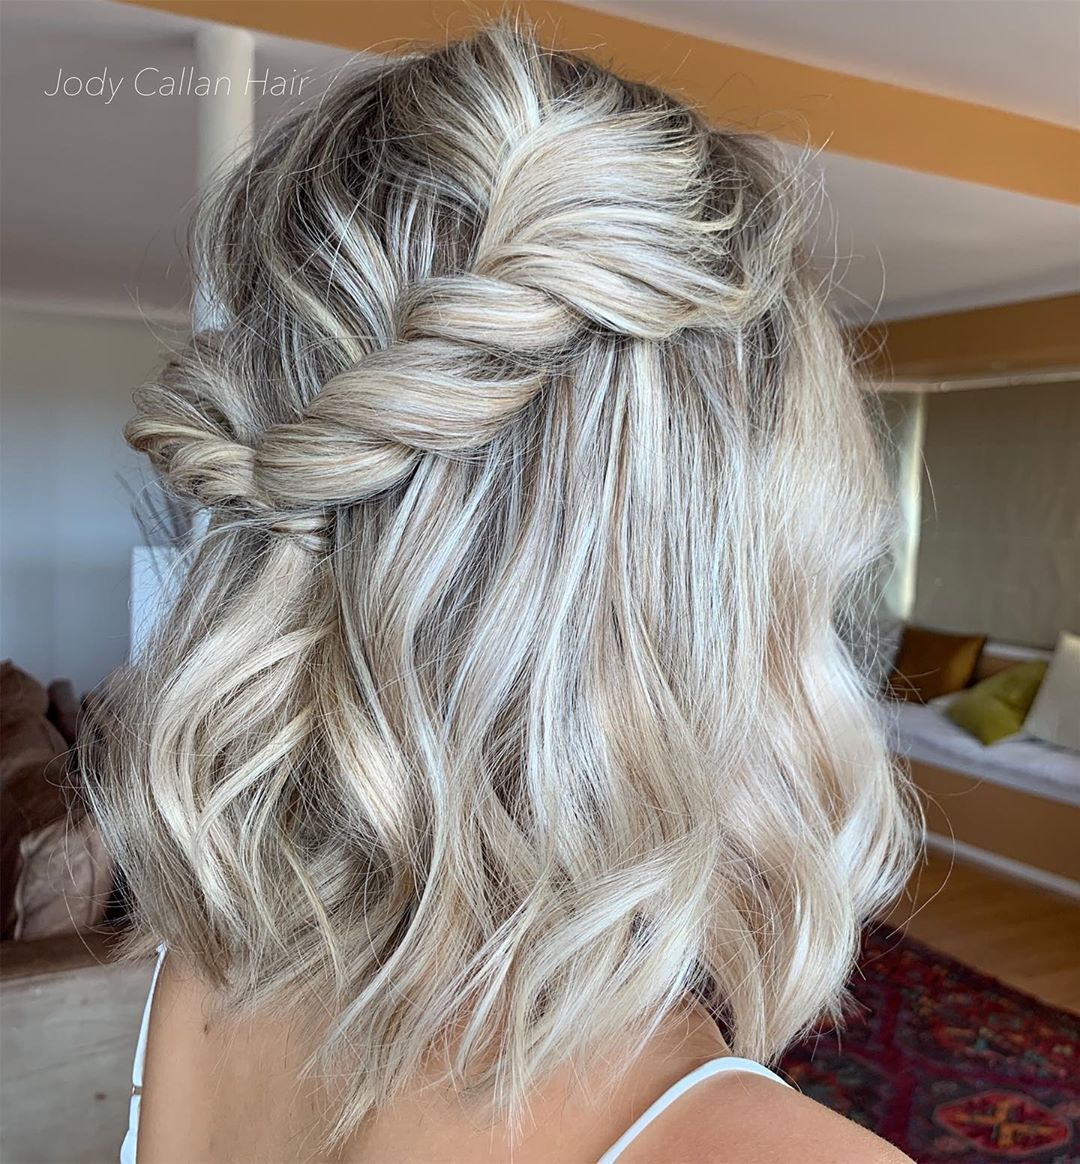 Bridal + Formal  Hairstylist on Instagram: “Loving all the short hair at the mo how cute is this hairstyle on one of my bridesmaids with the accent rope braid ! Would you wear this ?…” -   18 hair Bridesmaid how to ideas